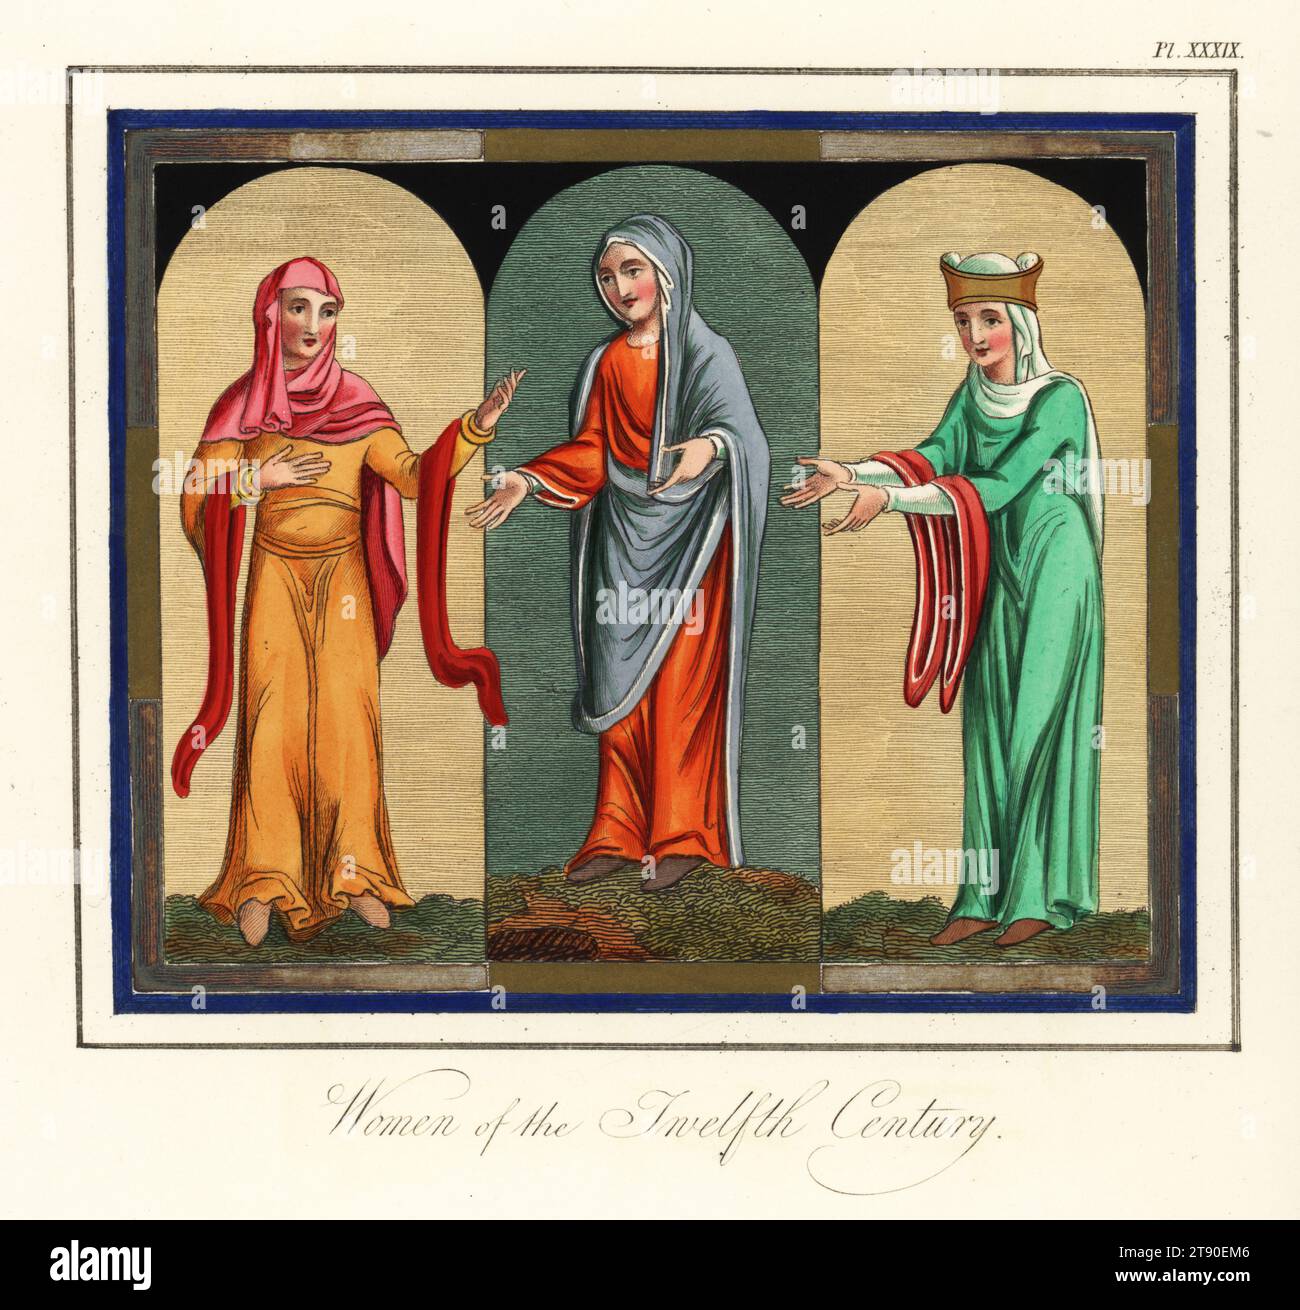 Anglo-Norman women of the 12th century. From Bodleian MS 614, and Sloan MS 1975. Handcoloured engraving by Joseph Strutt from his Complete View of the Dress and Habits of the People of England, Henry Bohn, London, 1842. Stock Photo